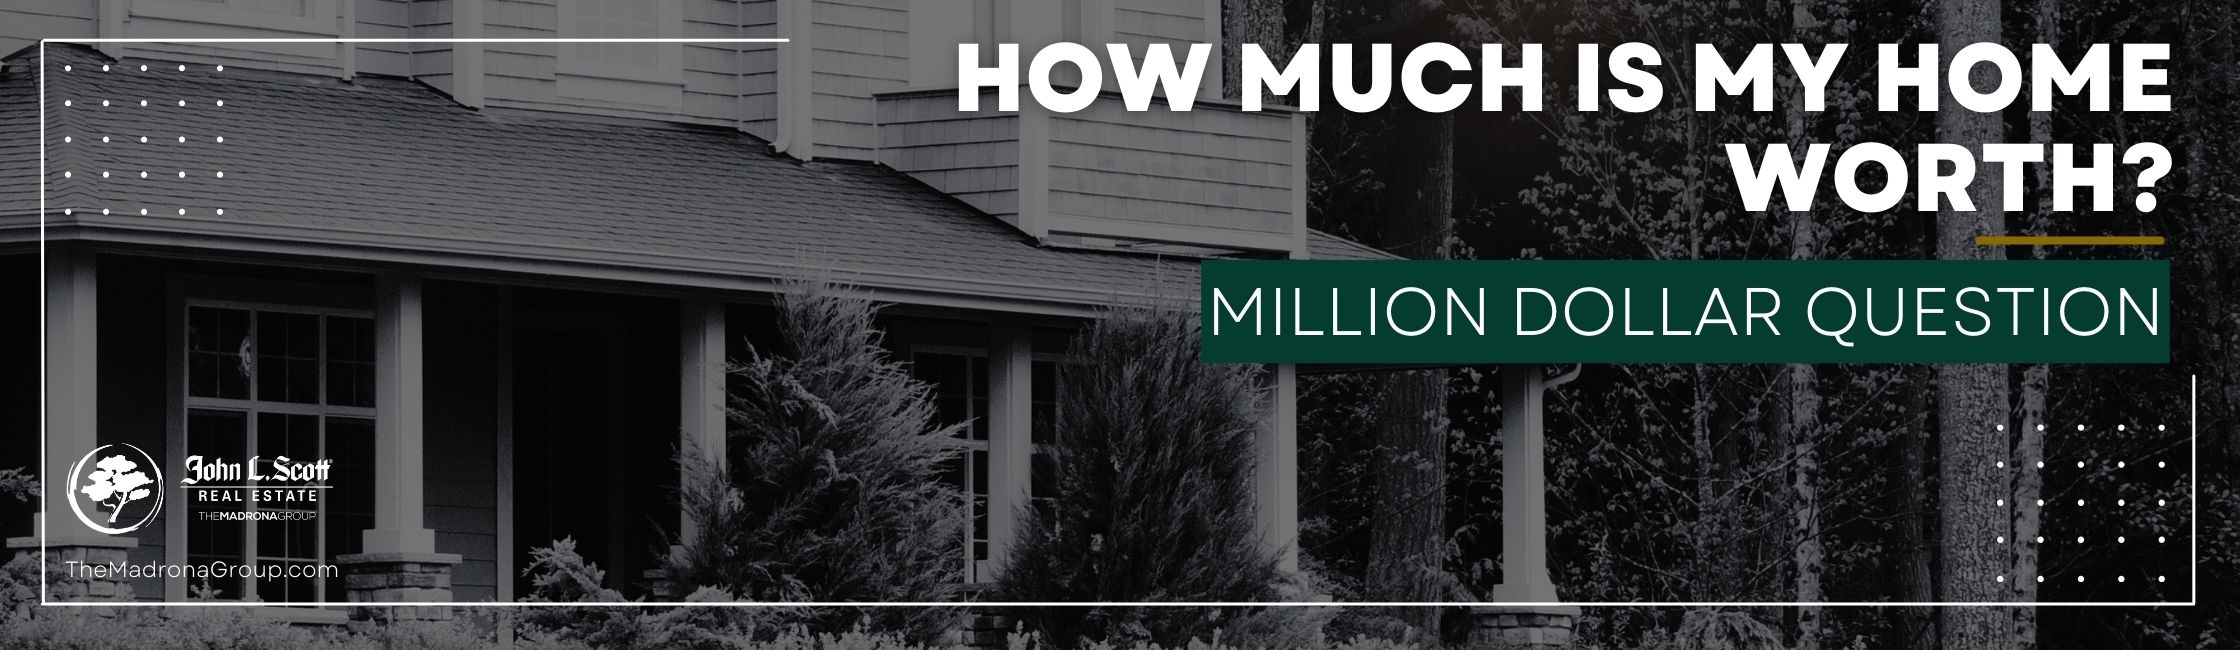 The Million Dollar Question: How Much Is My Home Worth?